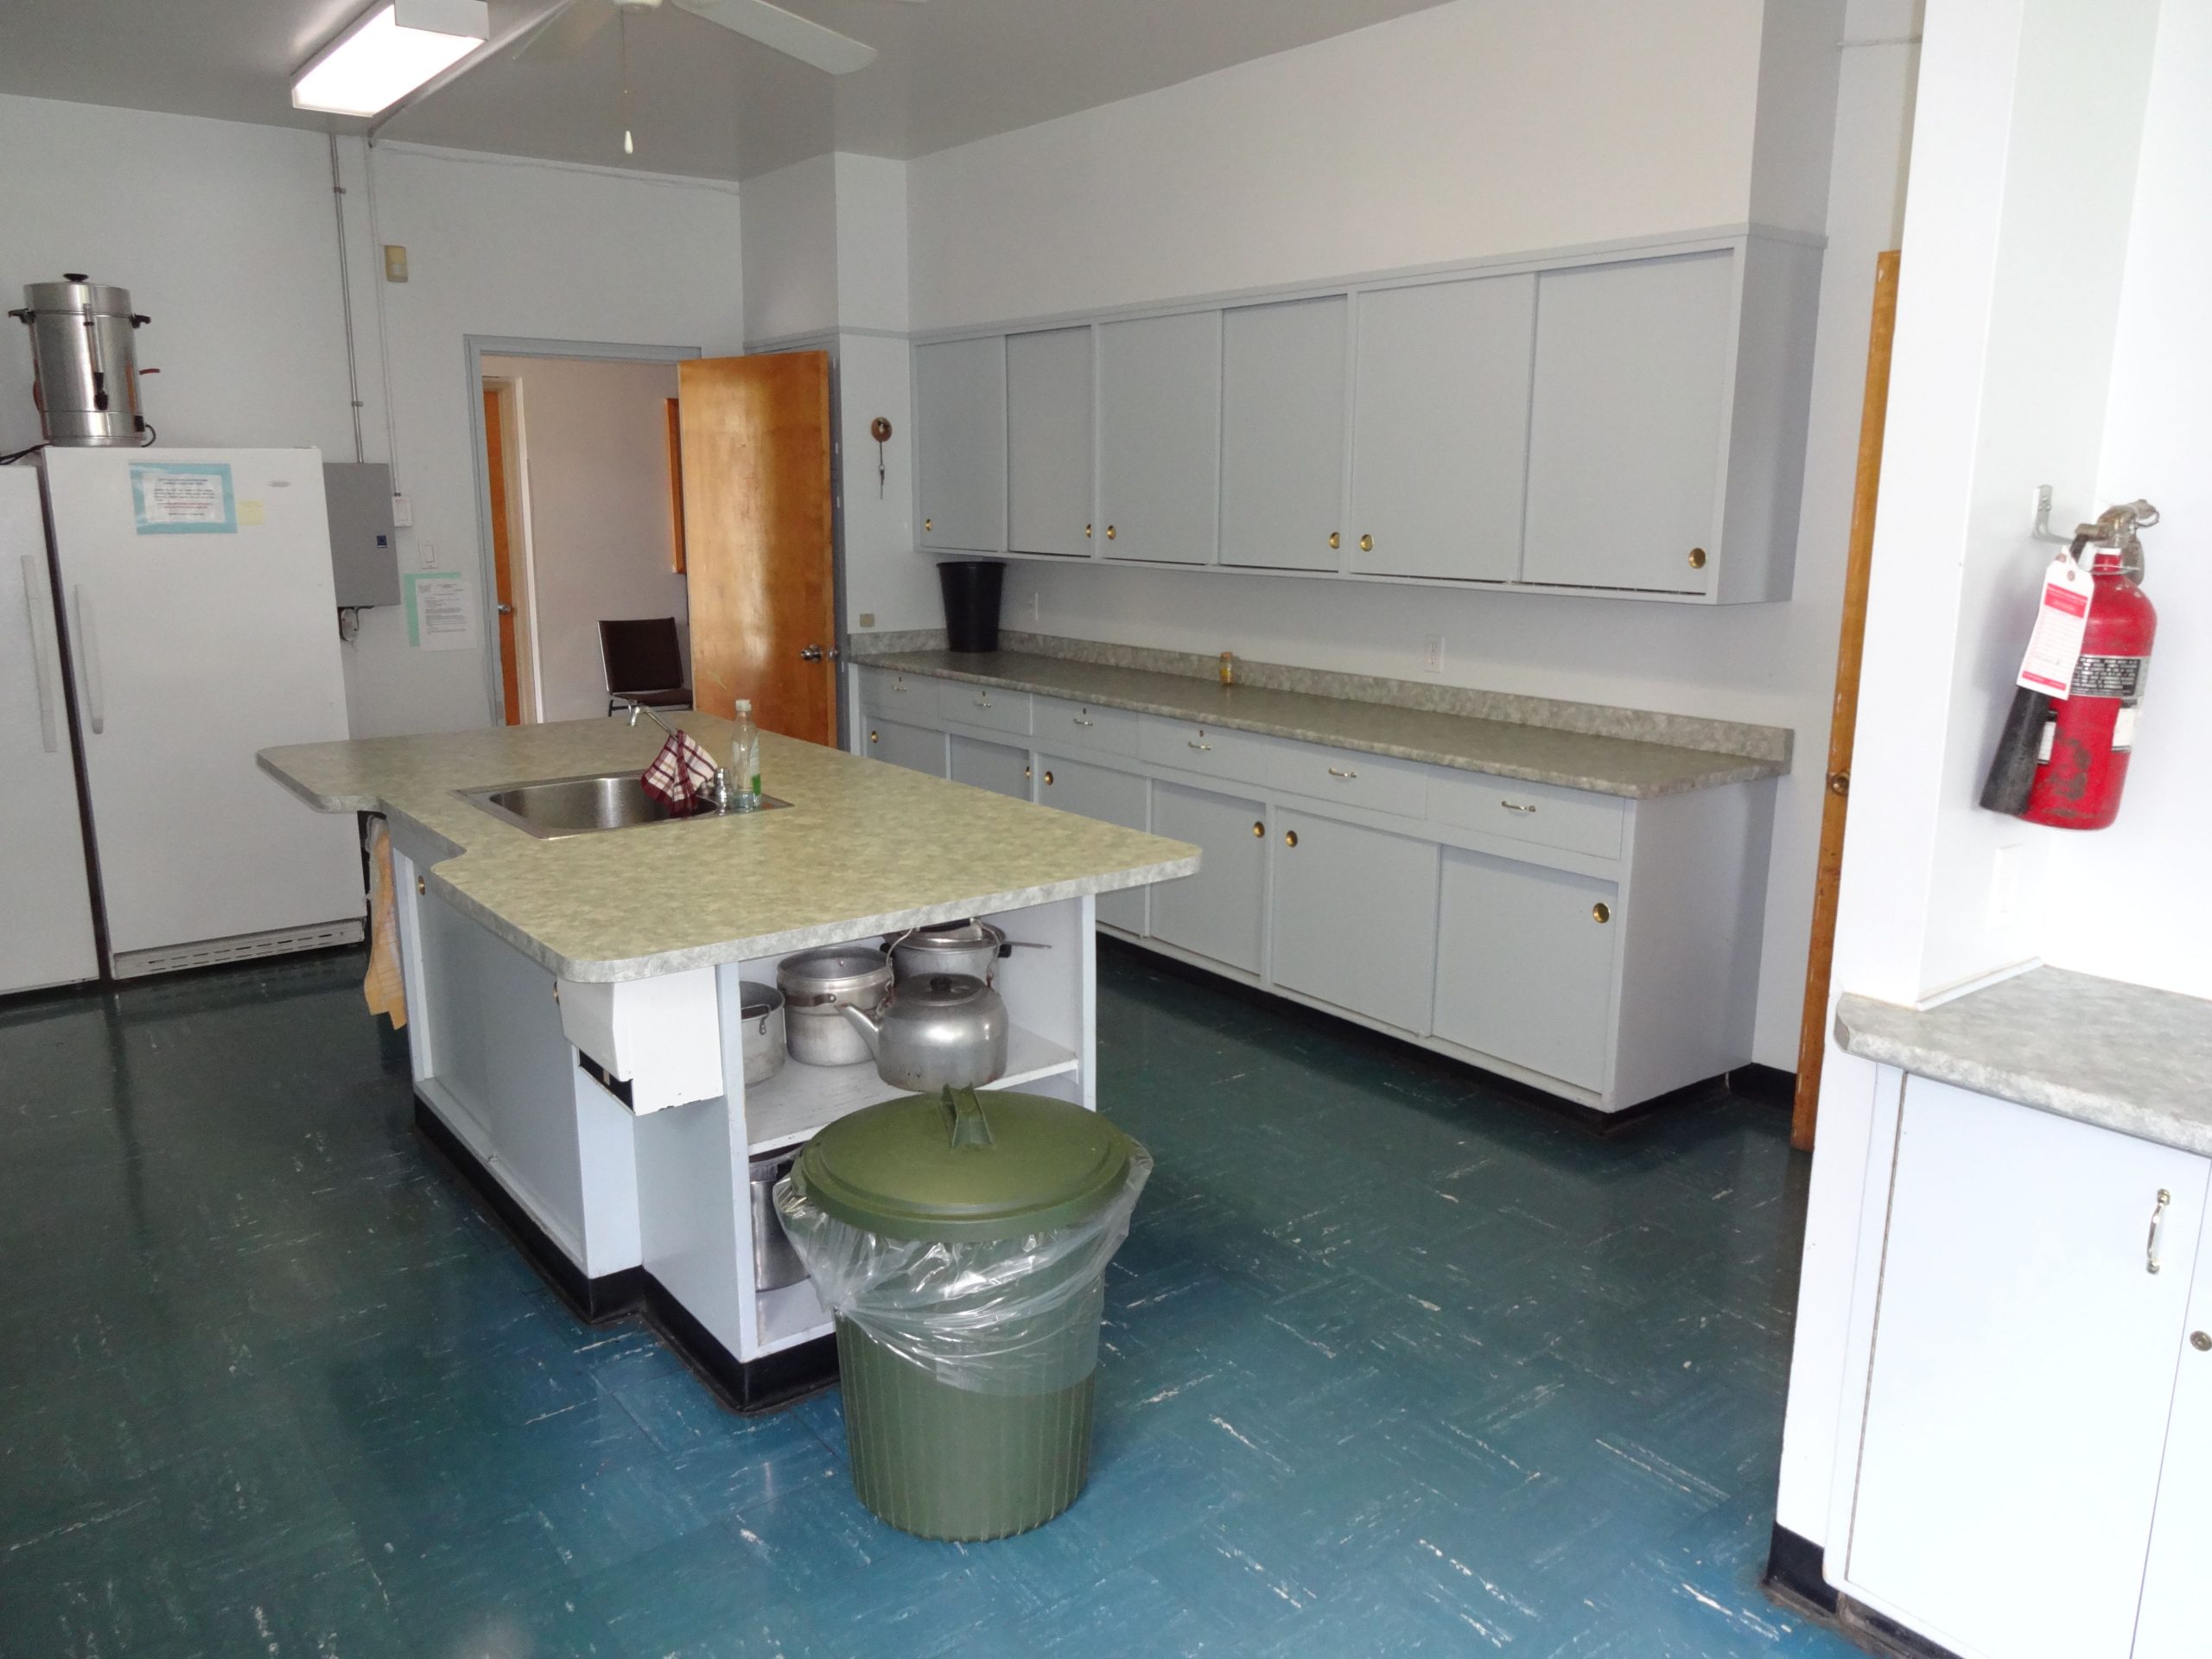 Image of the Kitchen taken from the back corner